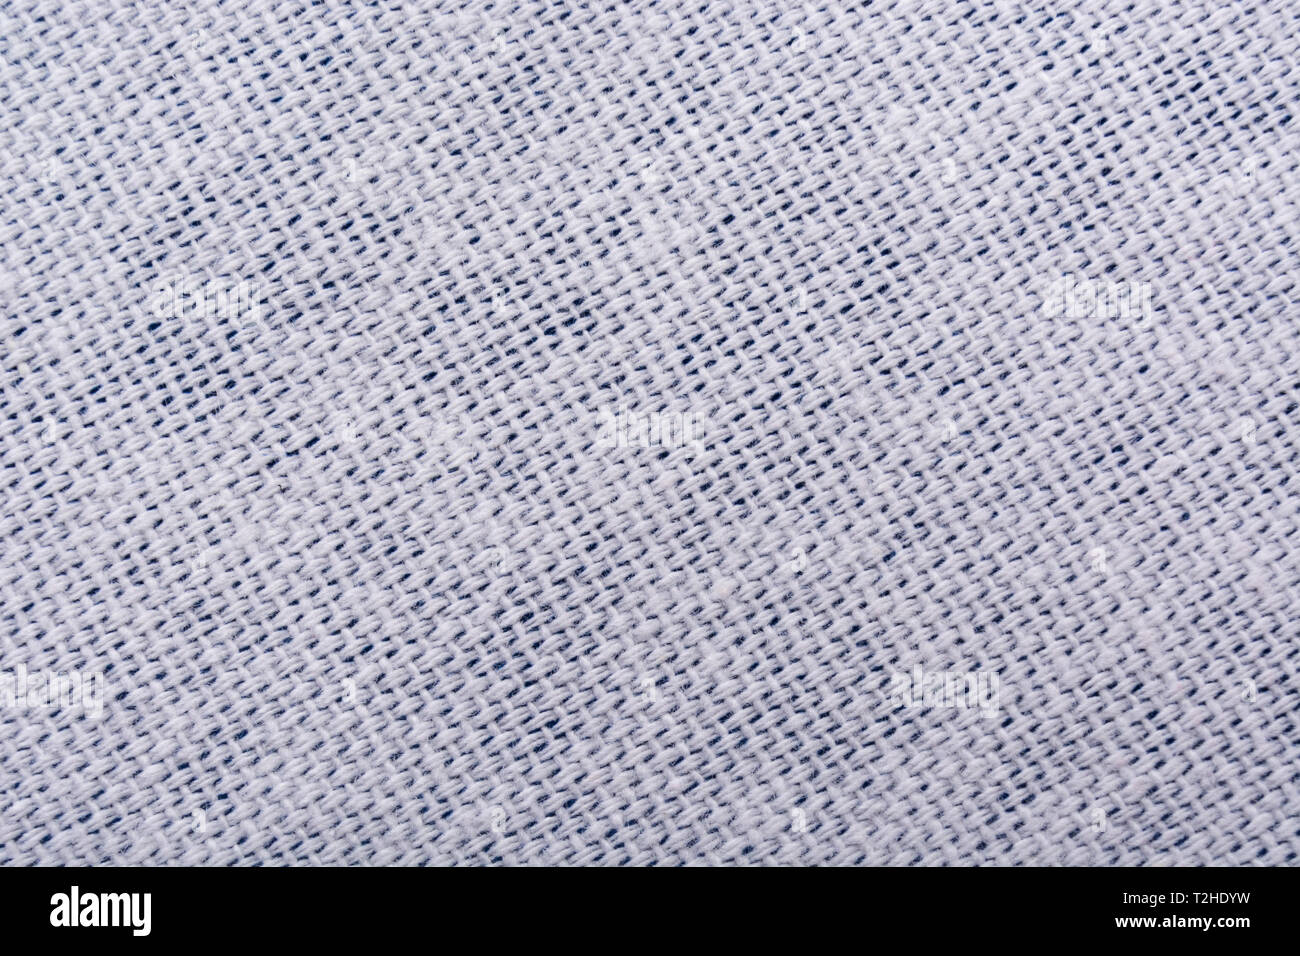 Close-up / macro of cotton material. Stitched line, line of stitches. Stock Photo